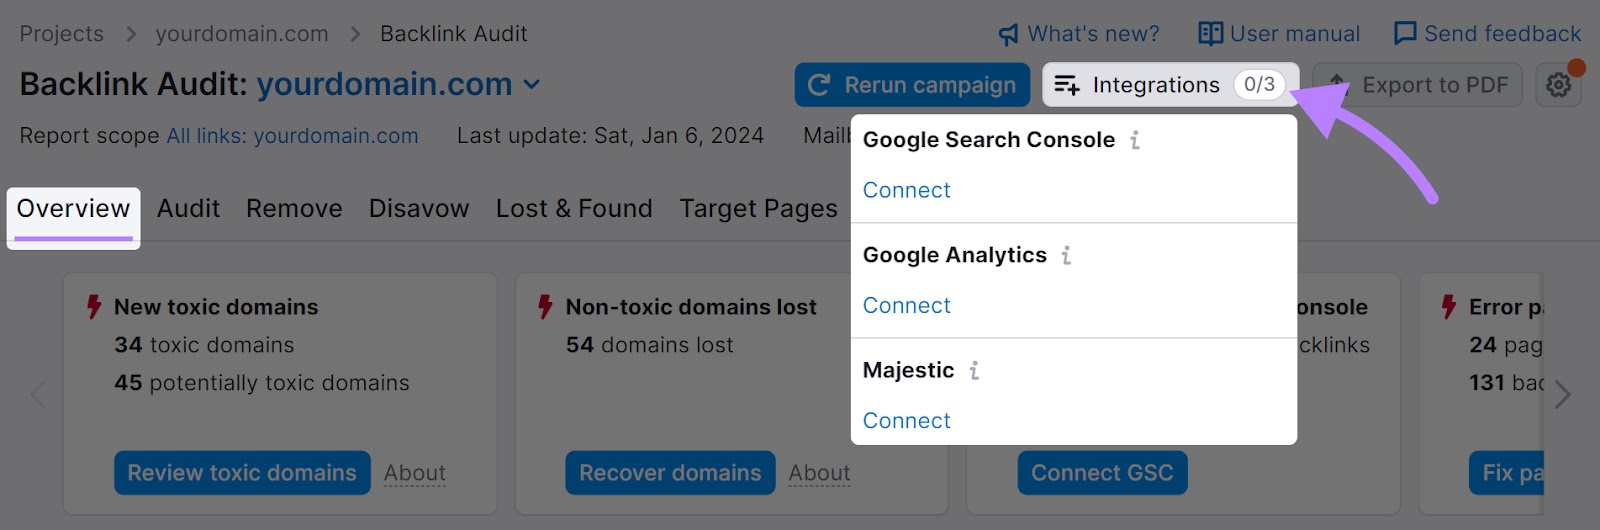 Connect Backlink Audit to Google Search Console nether  "integrations"